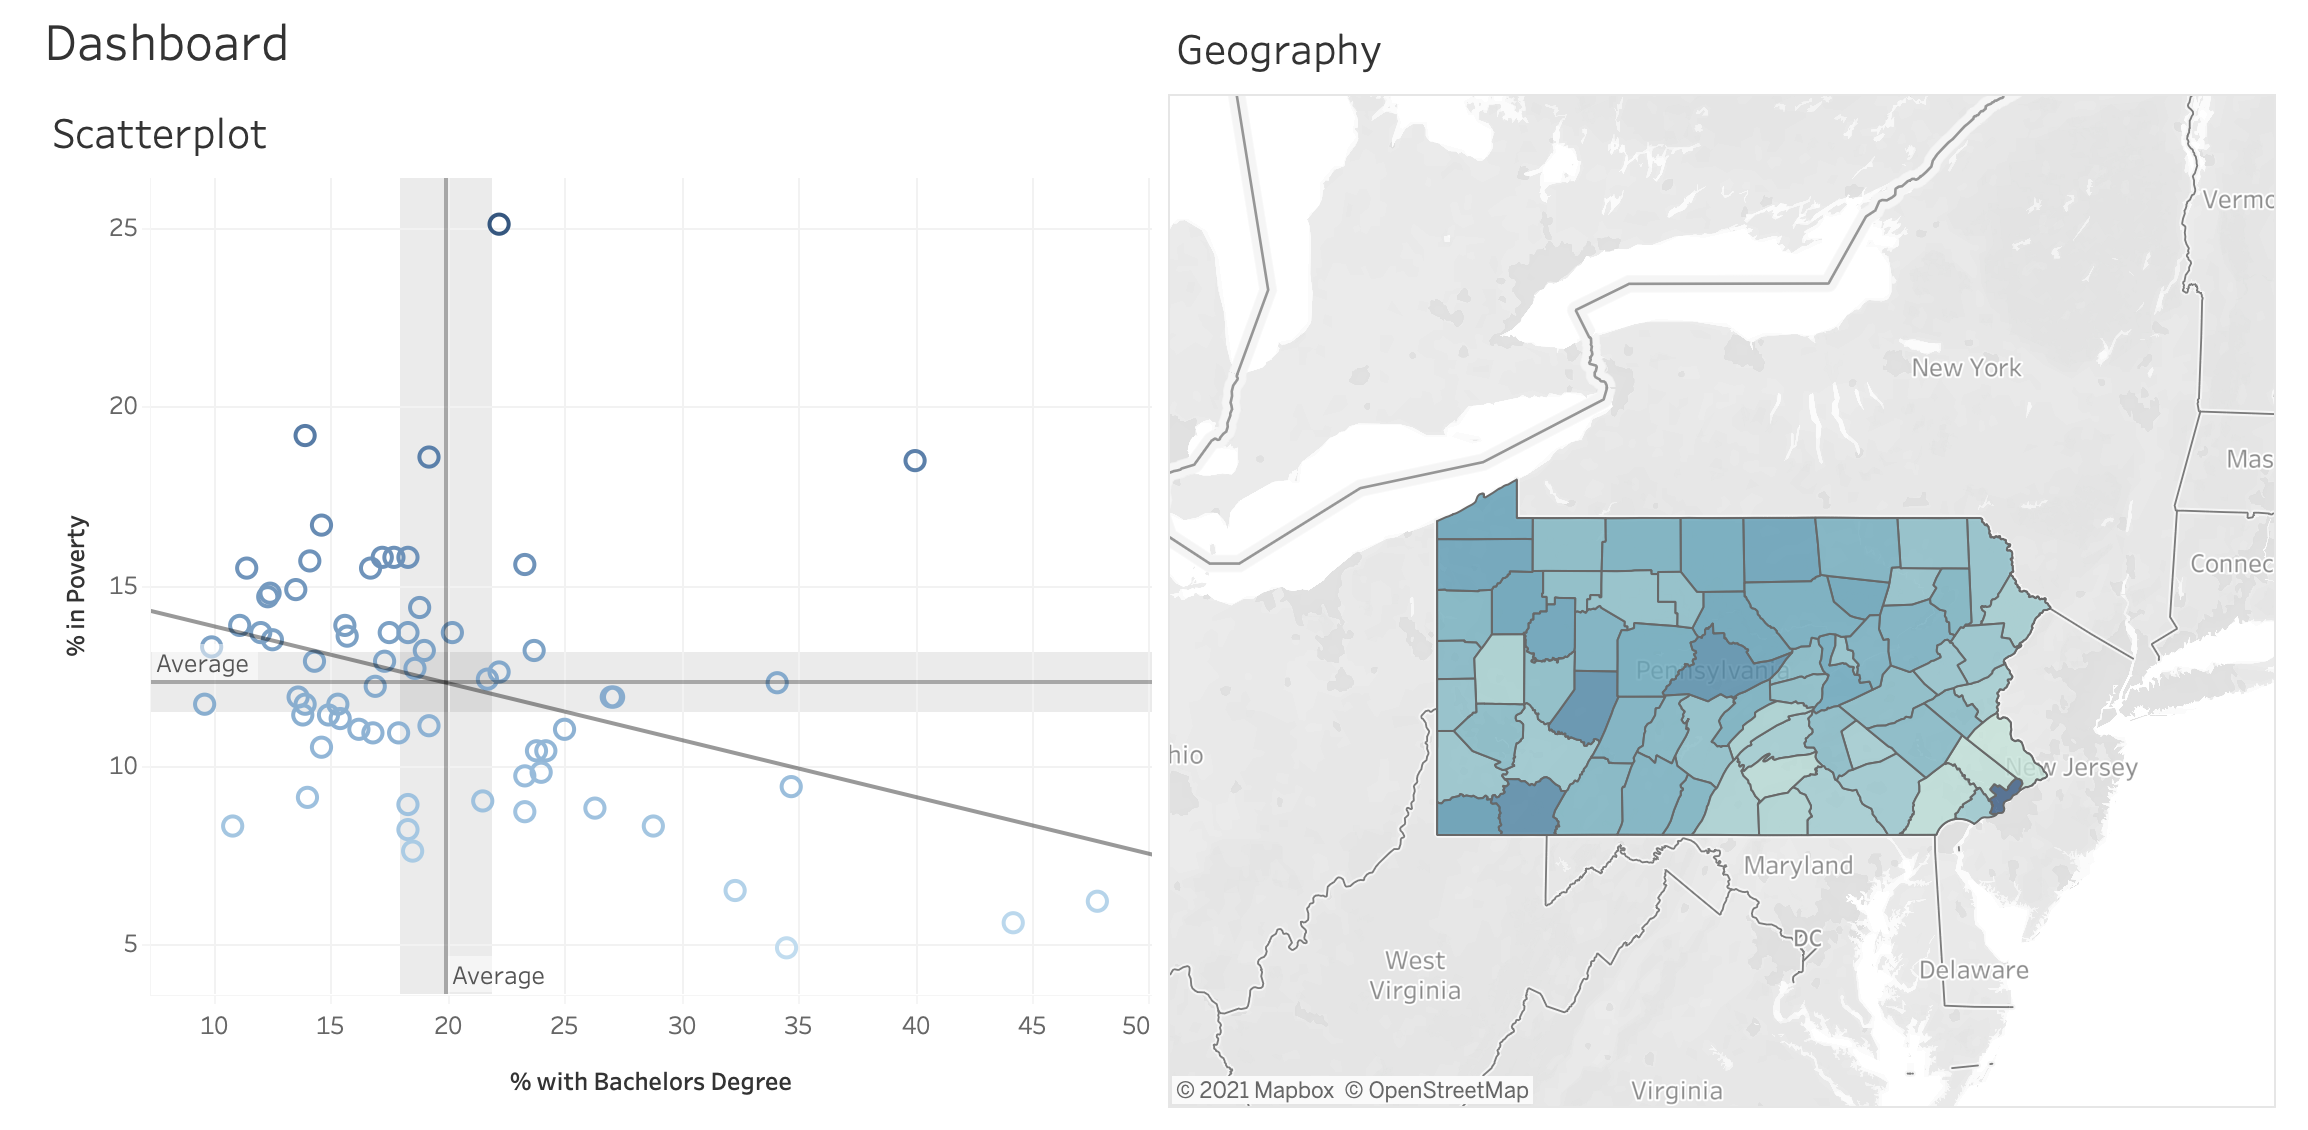 Tablea Screenshot showing the relationship between education and poverty in Pennsylvania counties